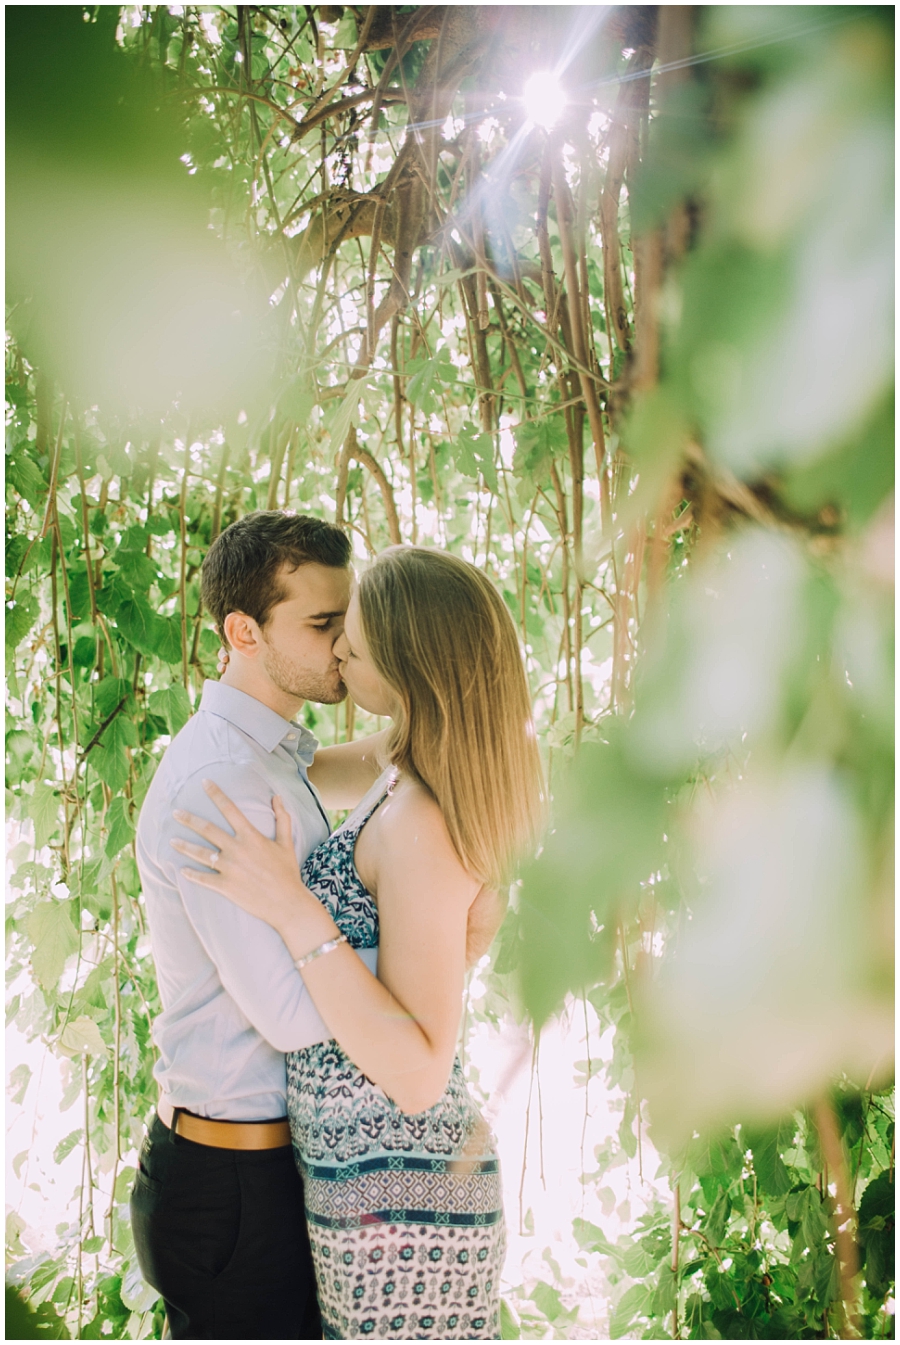 Ronel Kruger Cape Town Wedding and Lifestyle Photographer_8444.jpg